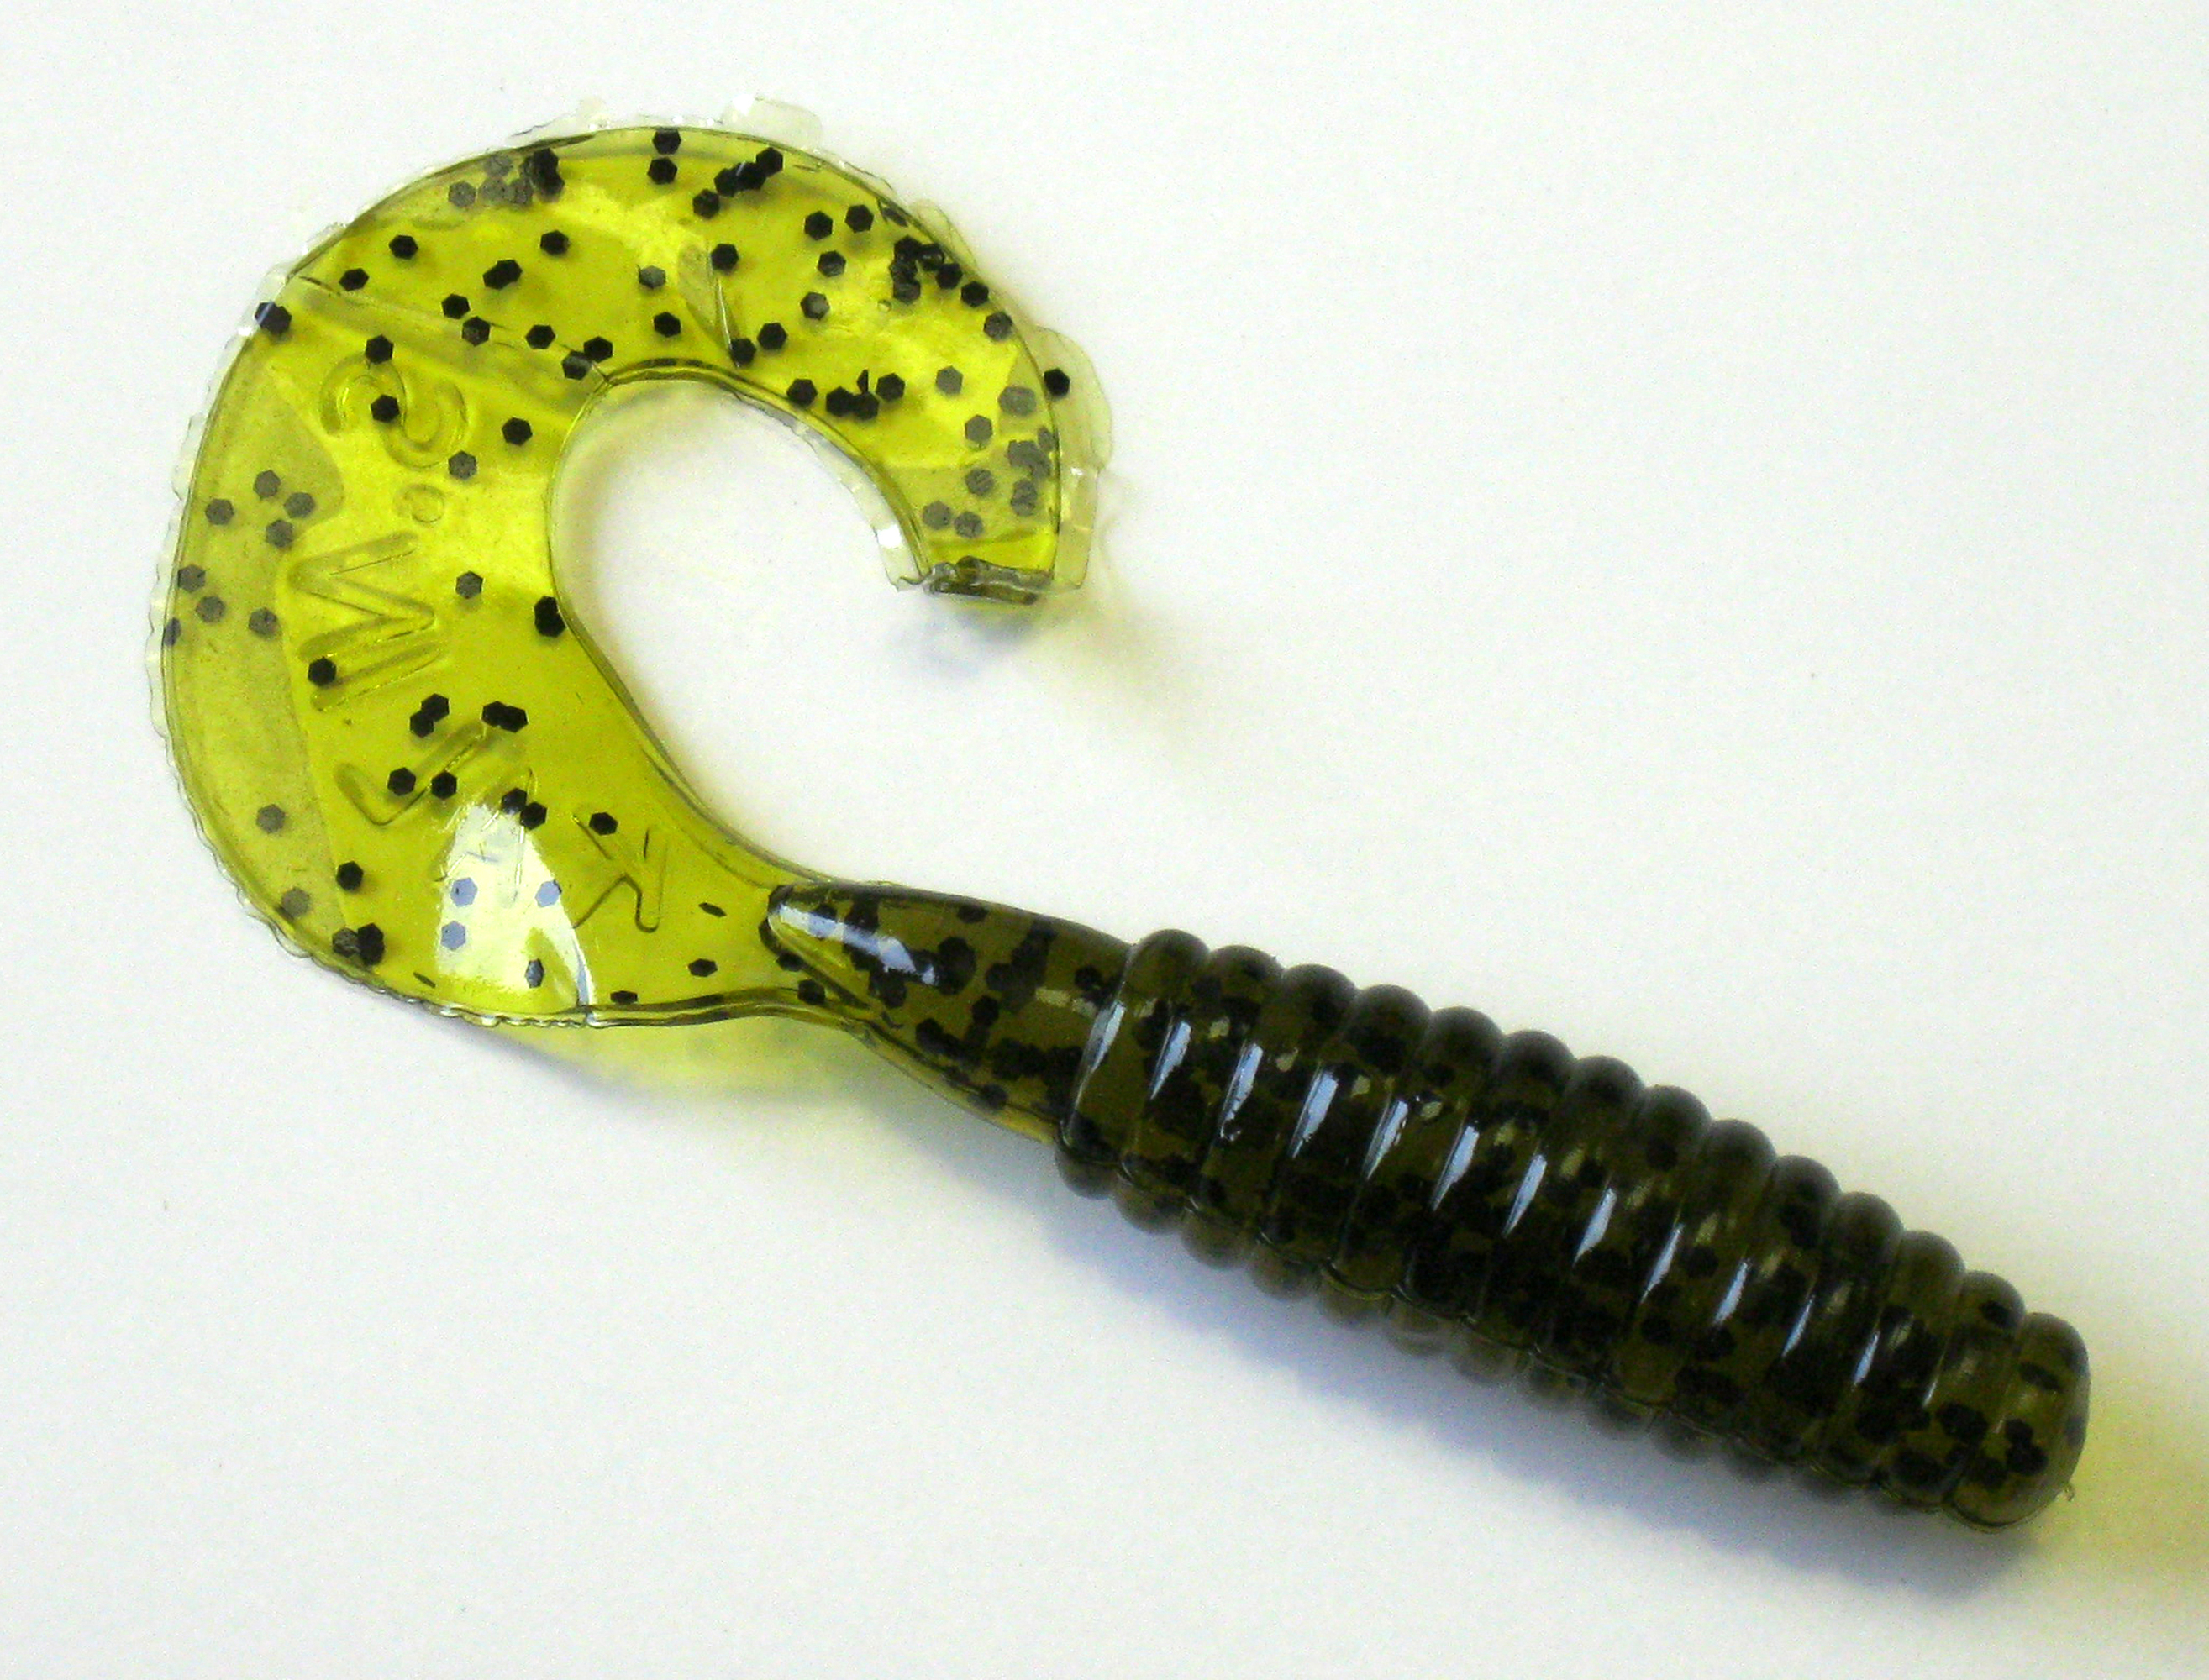 Kalin's Fishing Kalin Lunker Grub, 5in  Up to 29% Off Free Shipping over  $49!